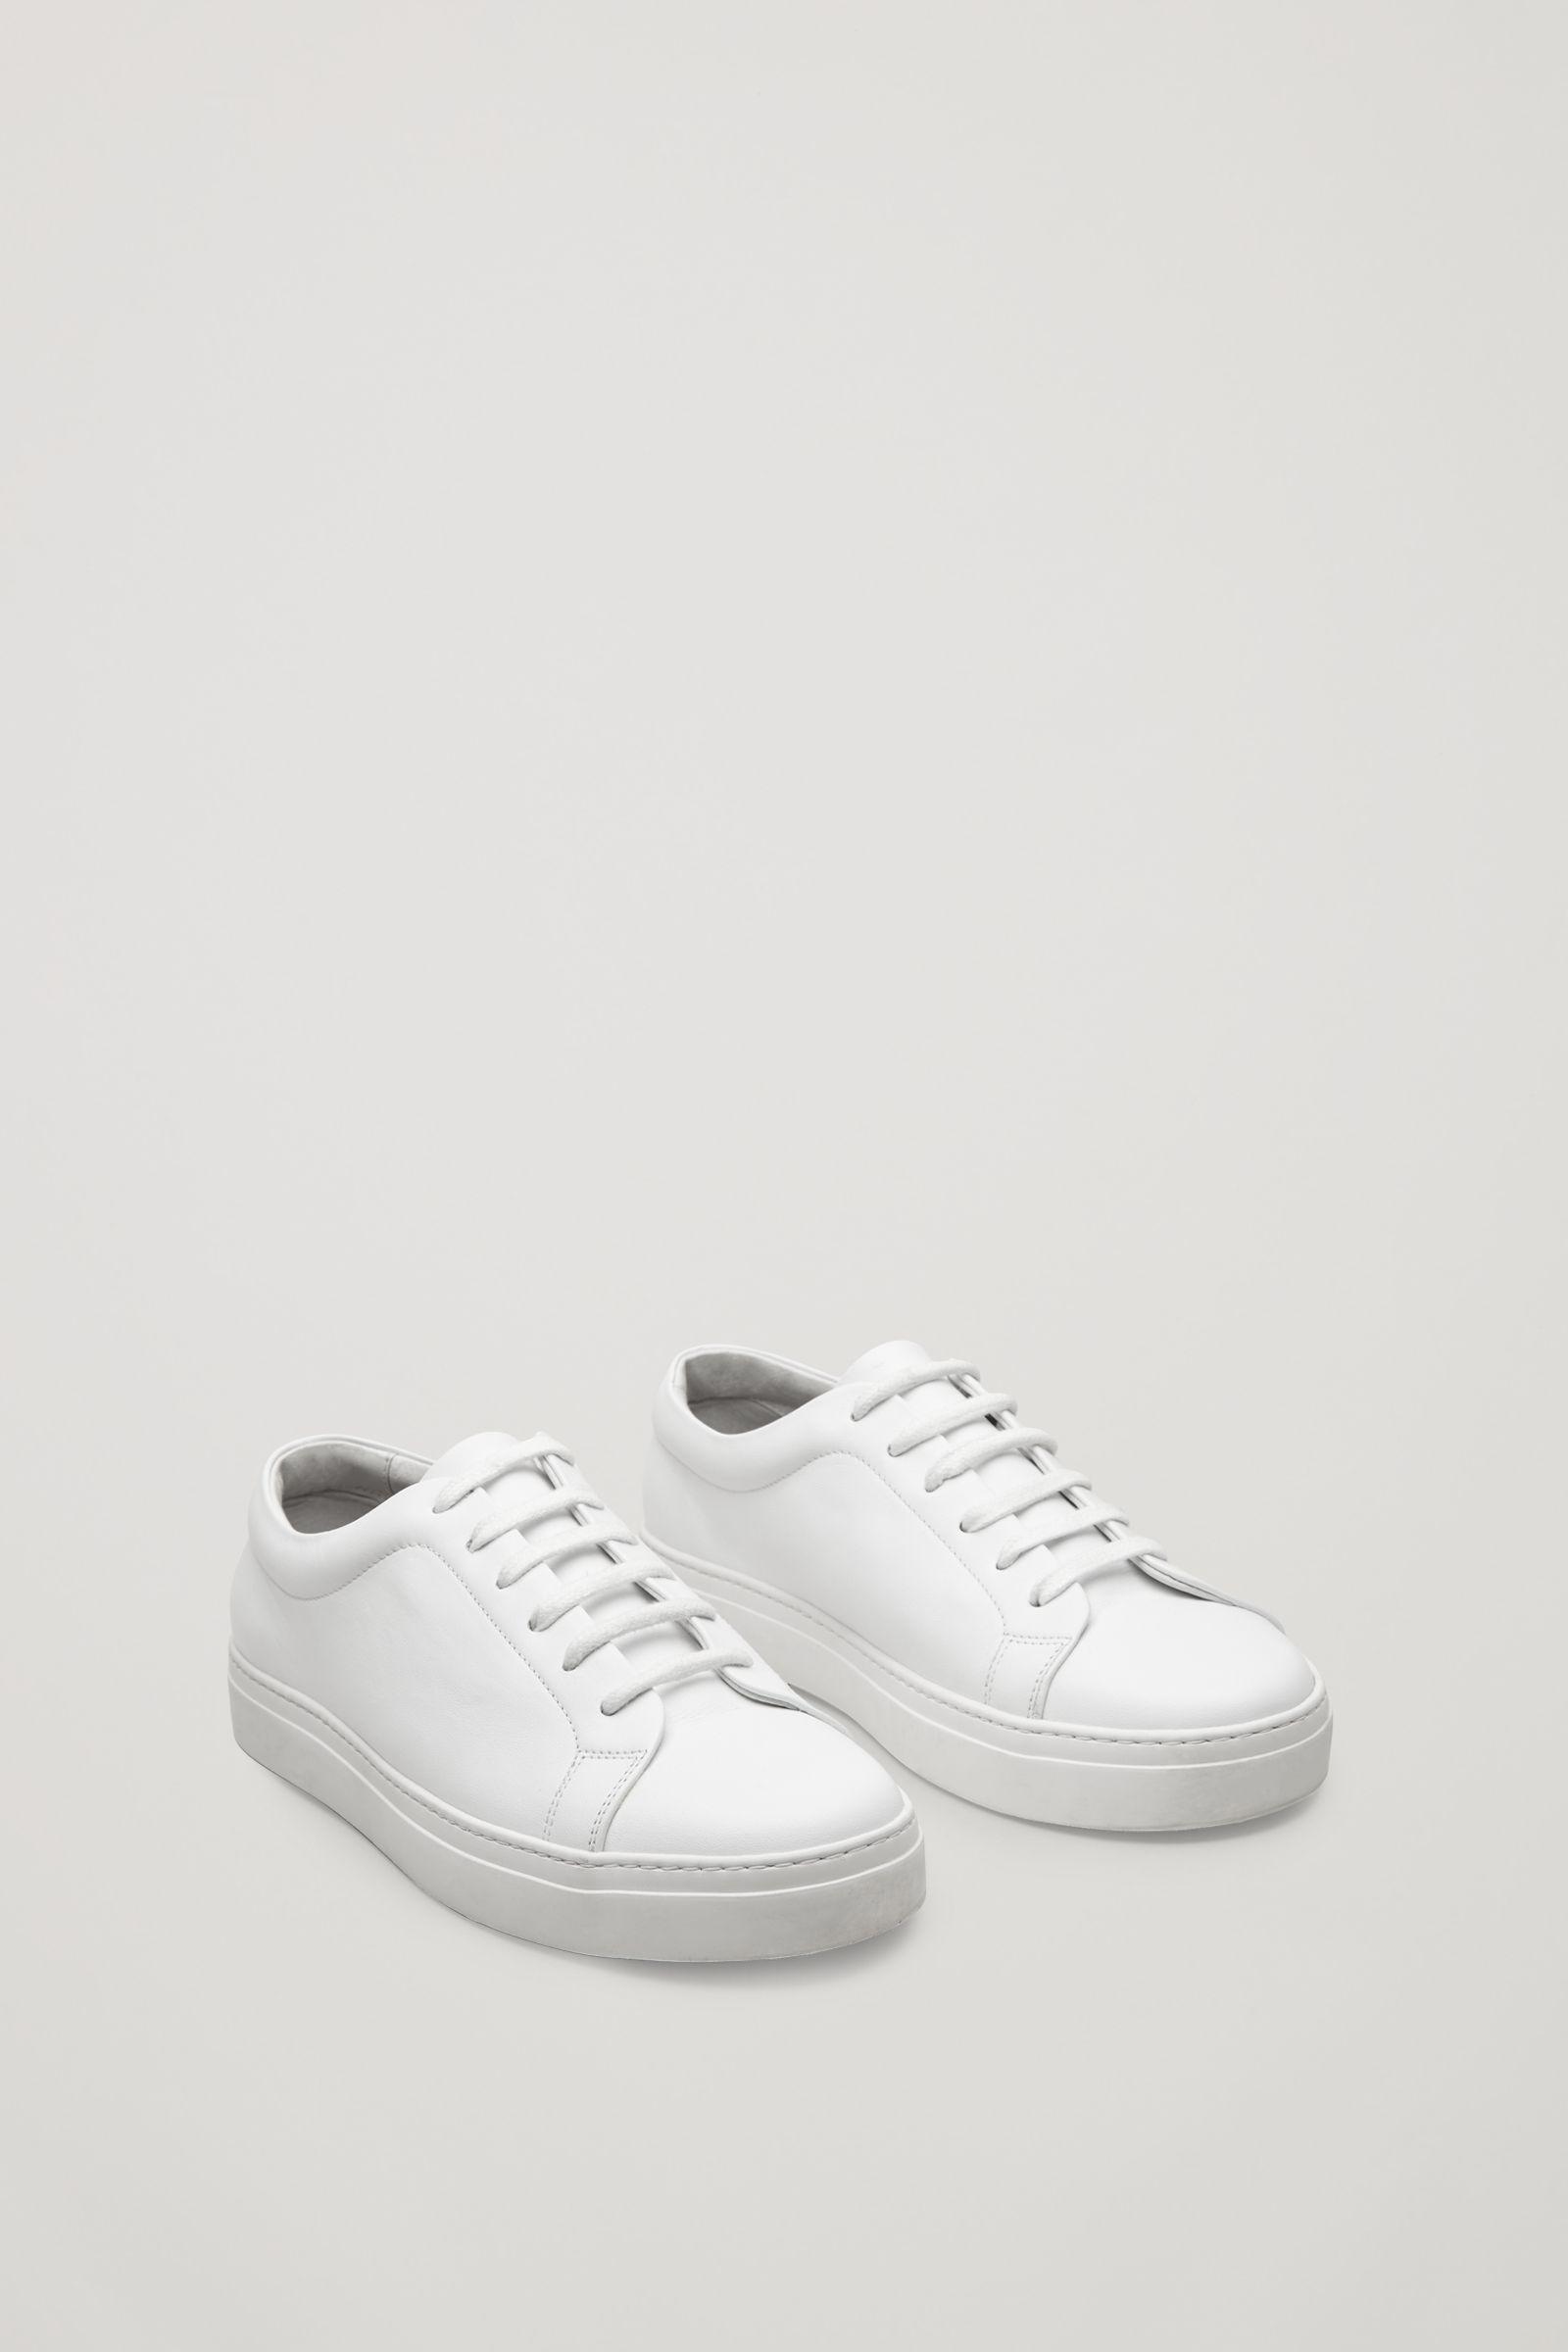 cos white sneakers